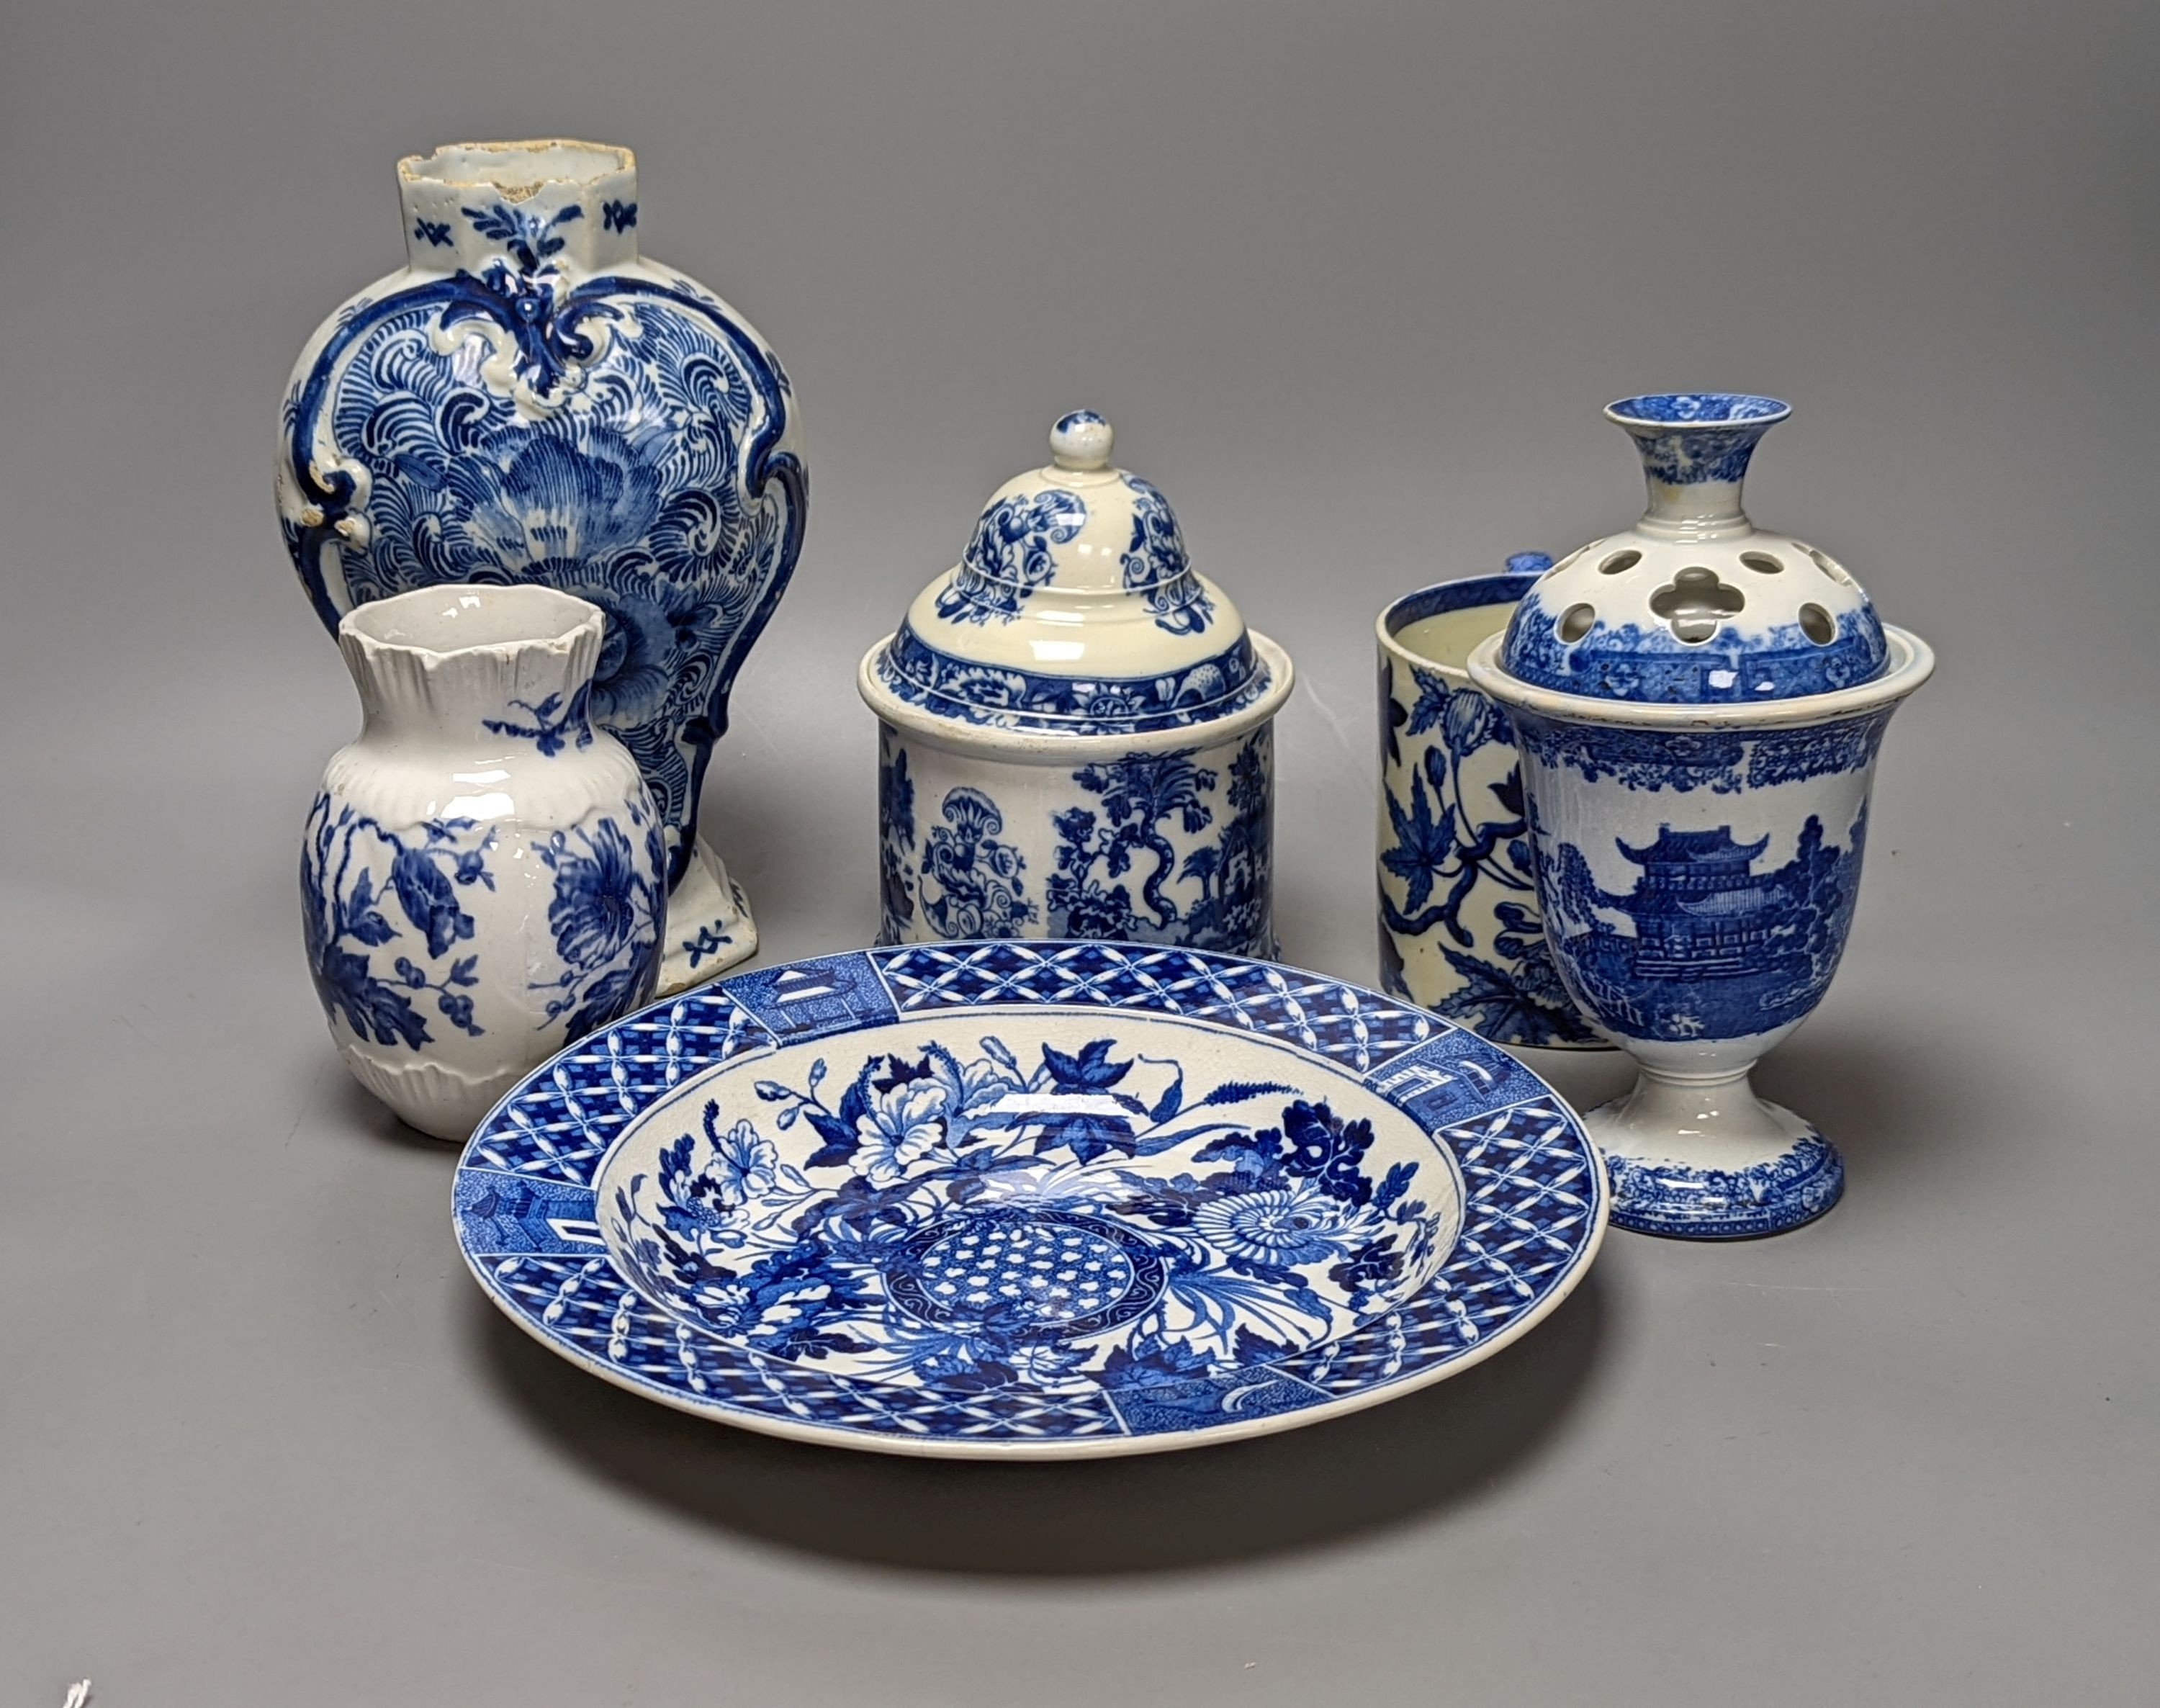 Four items of early 19th century blue and white pearlware pottery, an 18th century Delft blue and white vase and a 19th century toothbrush holder, Delft vase 22 cms high.